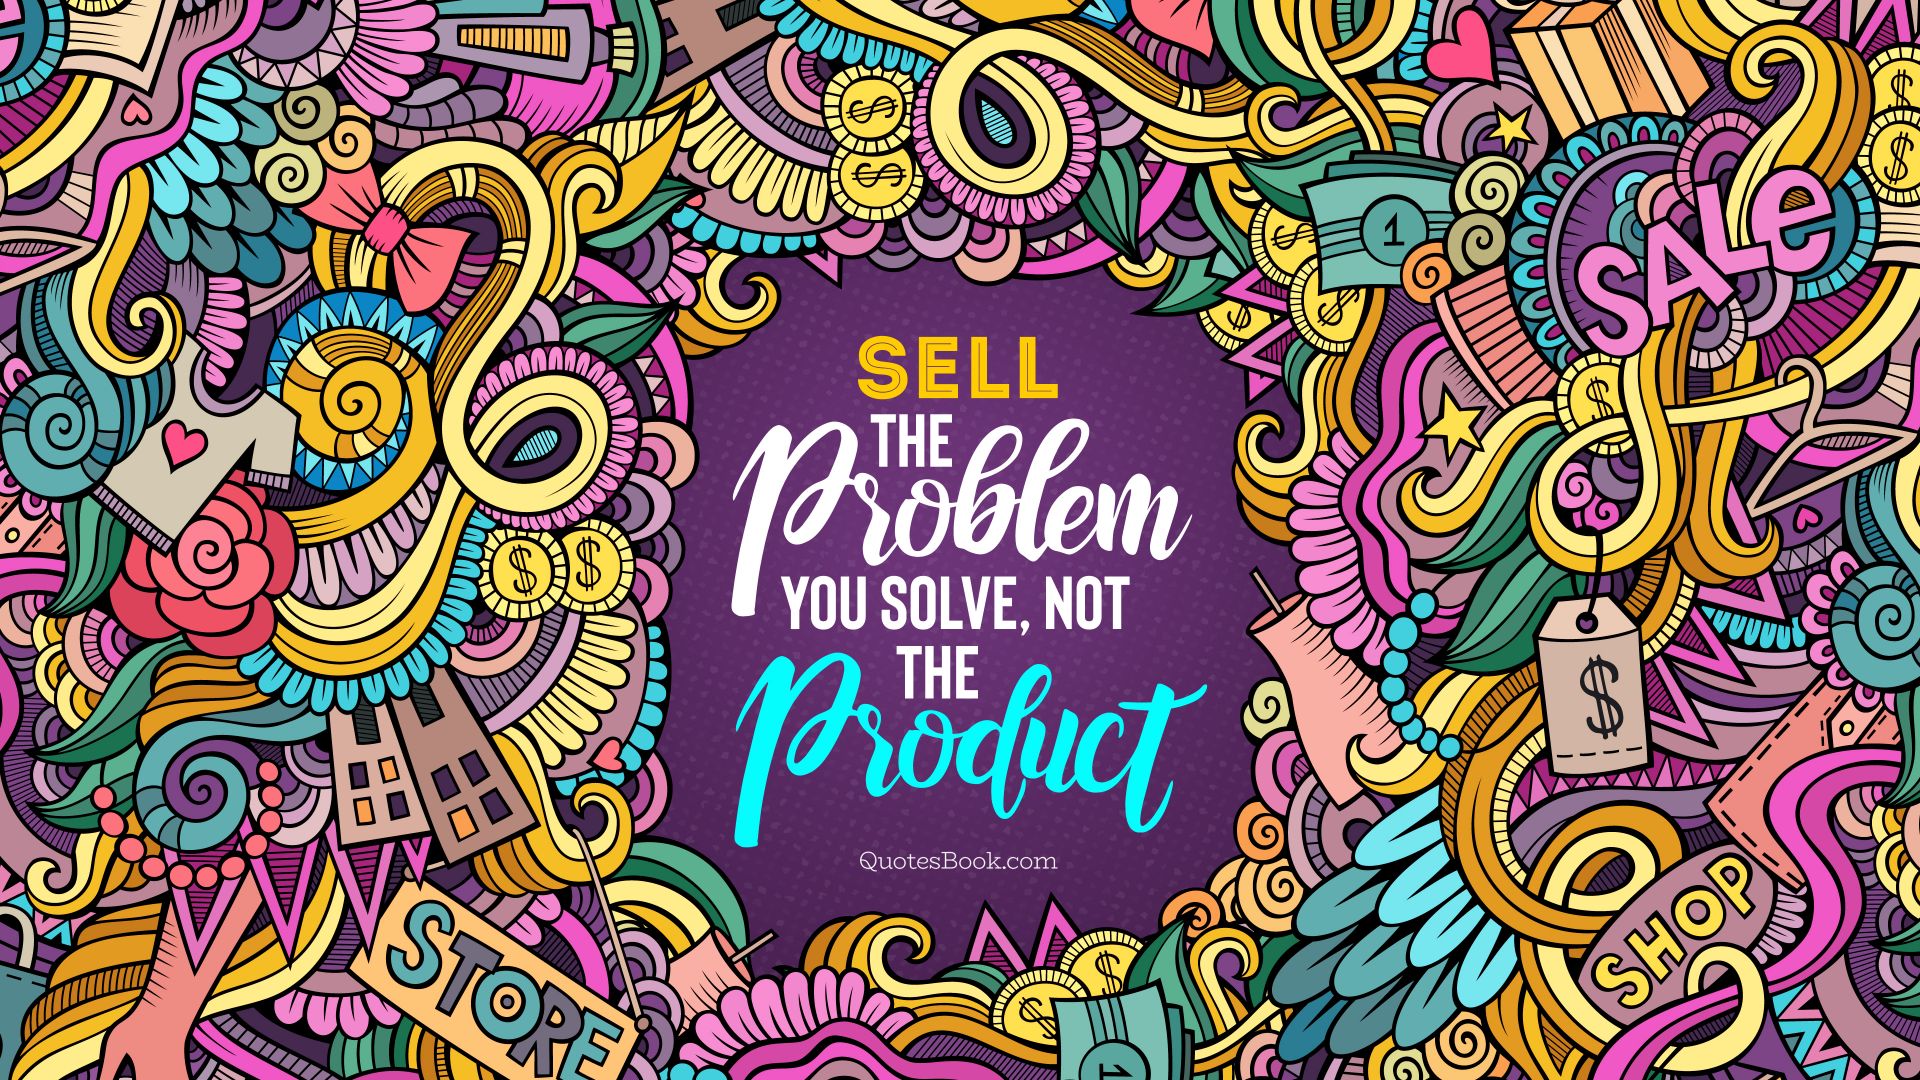 Sell the problem you solve, not the product